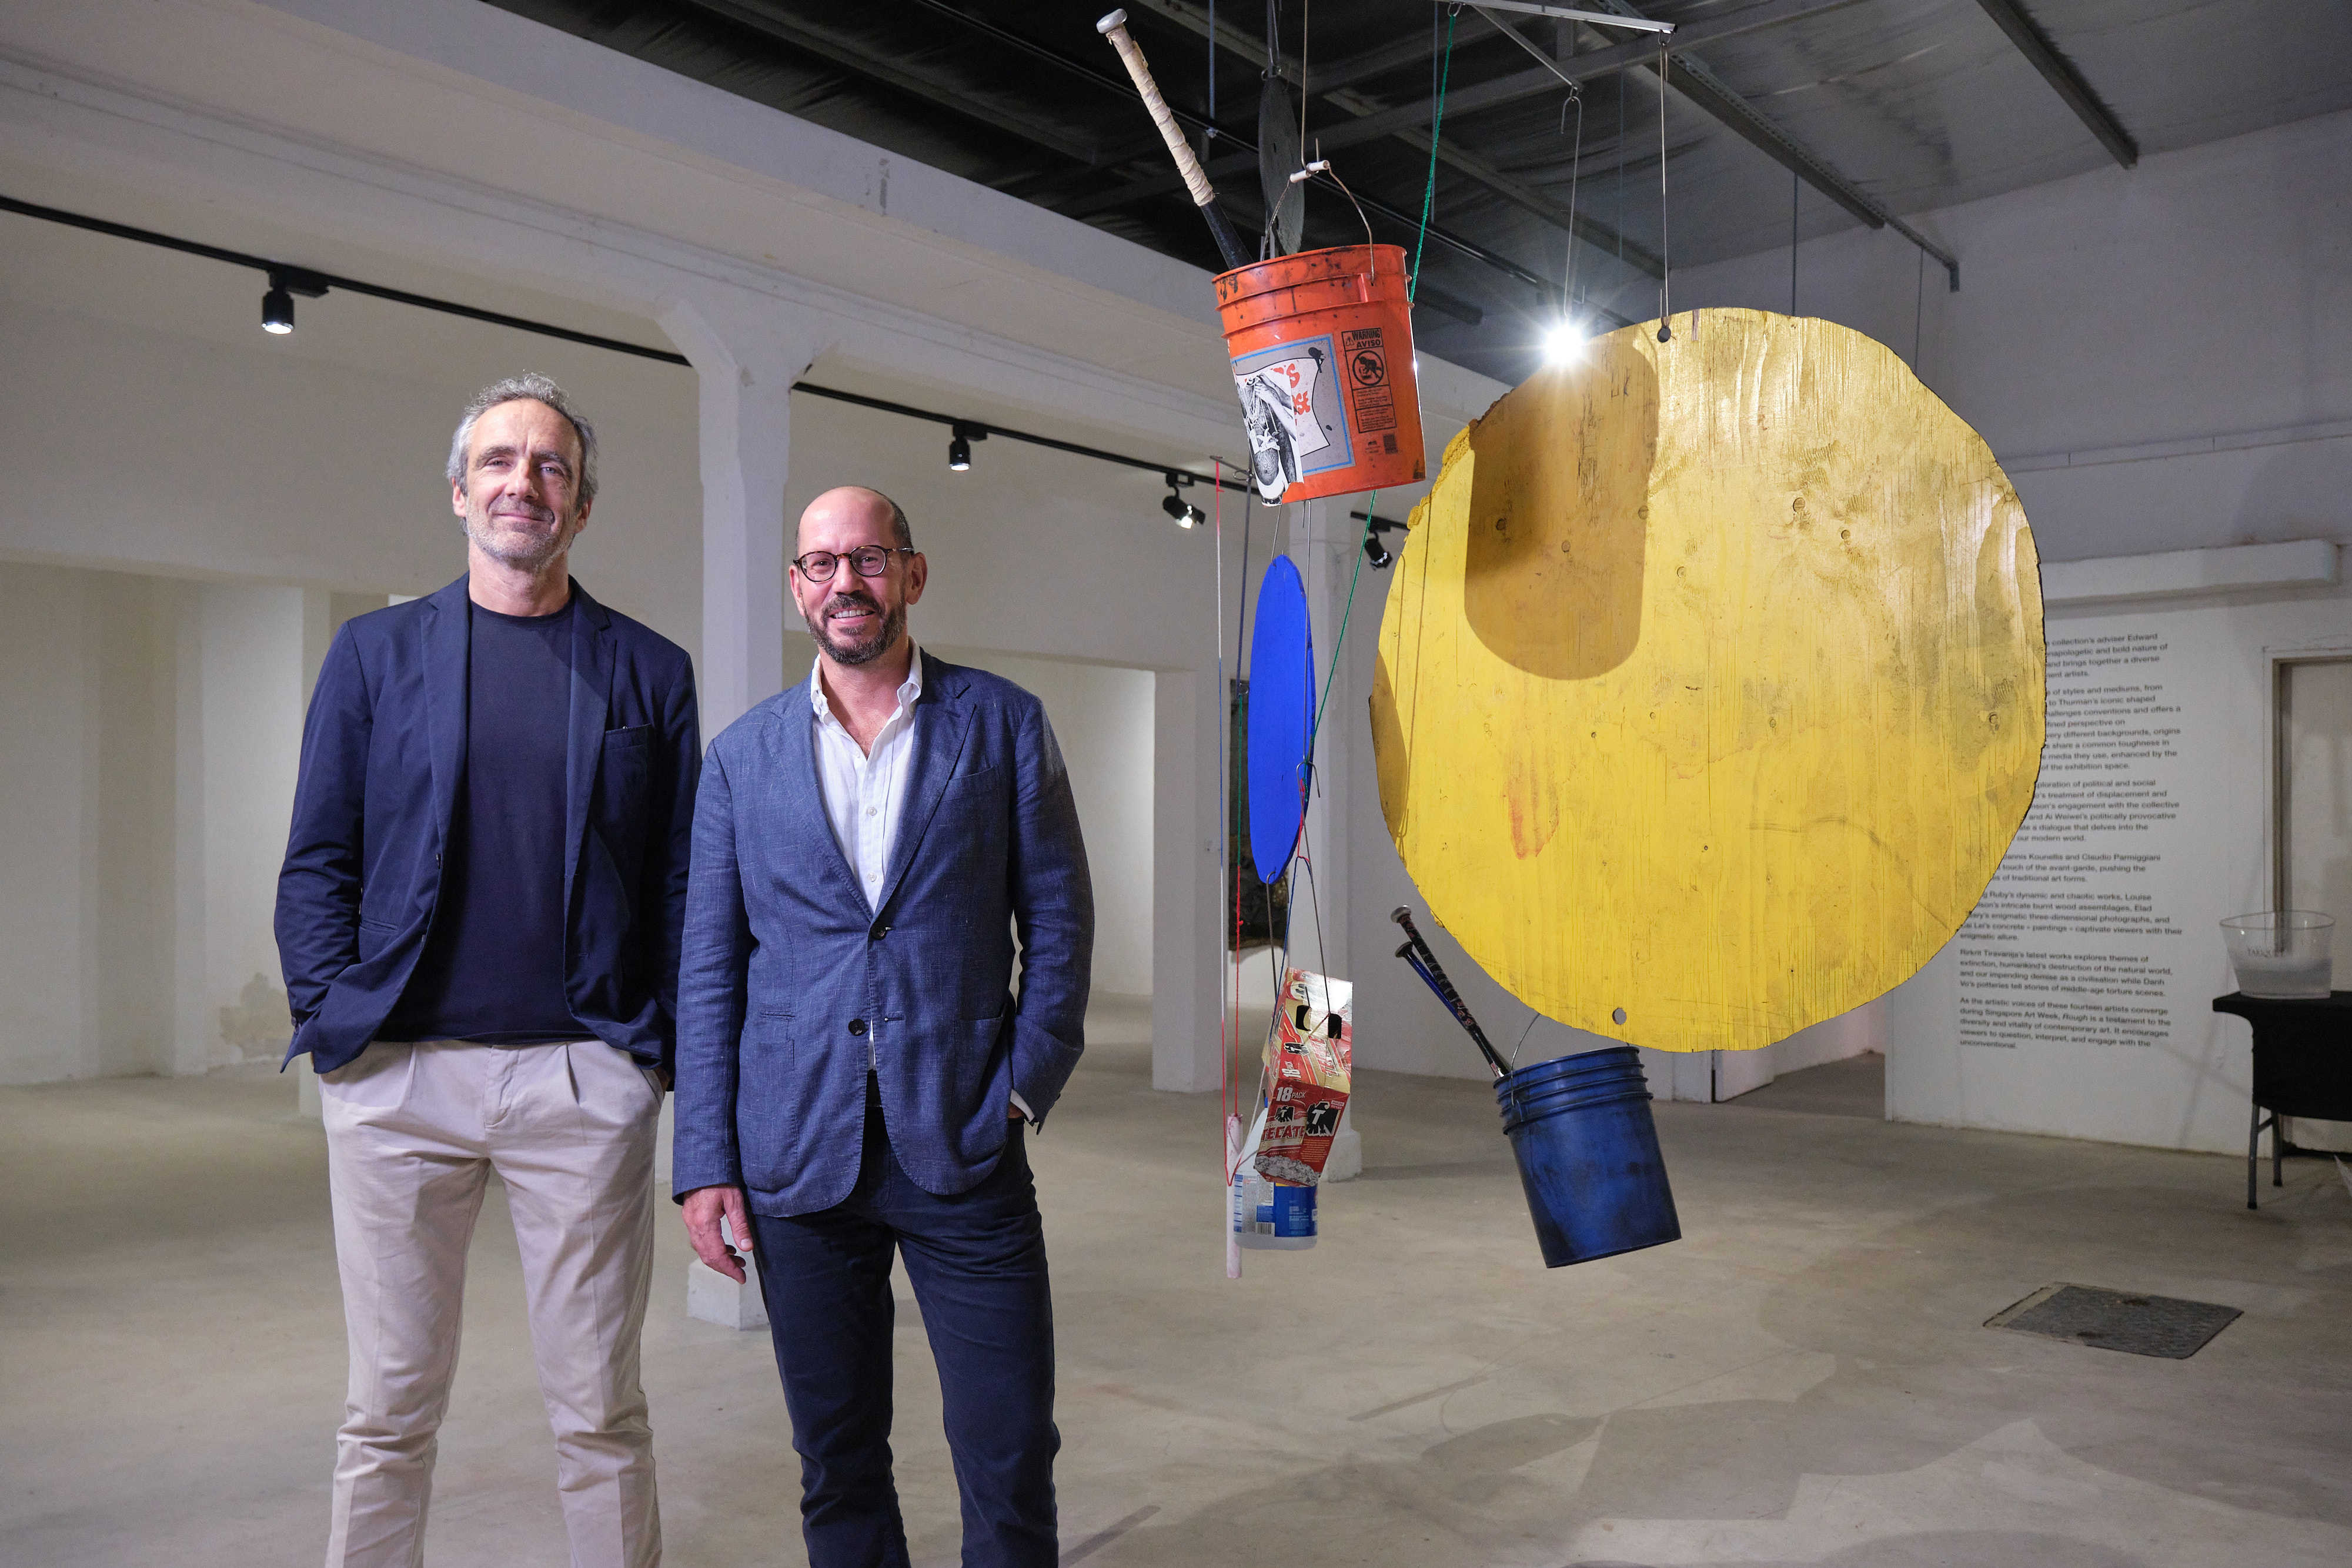 Singapore-based collector Pierre Lorinet (right) with Edward Mitterrand, curator of “Rough”, an exhibition at Gillman Barracks featuring works from Lorinet’s collection. Photo: Pierre Lorinet Collection